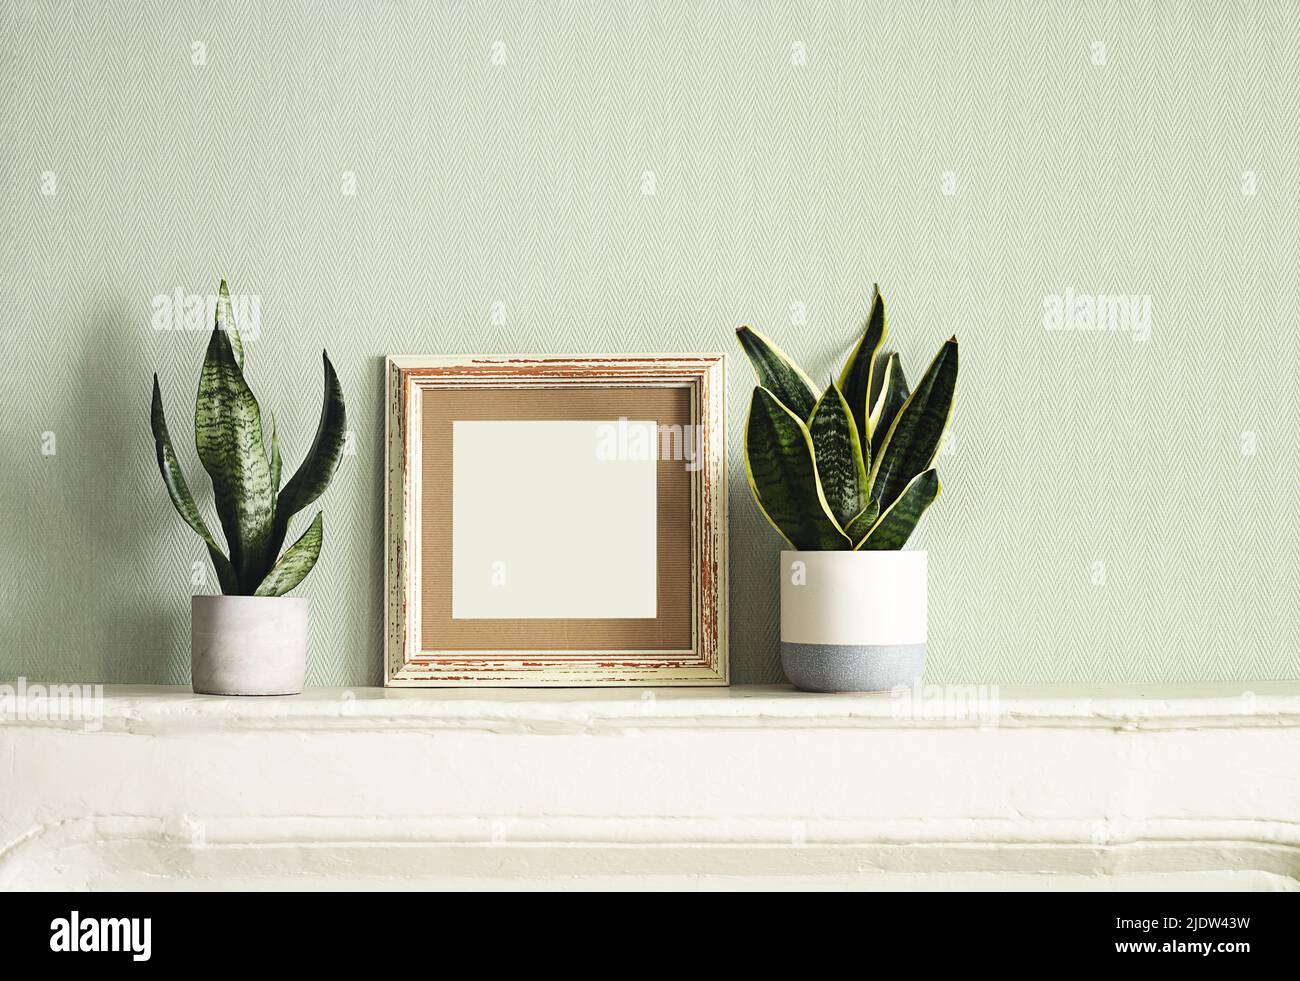 Wooden mock up photo frame and home plants of sansevieria or snake plant on a white old shelf Stock Photo